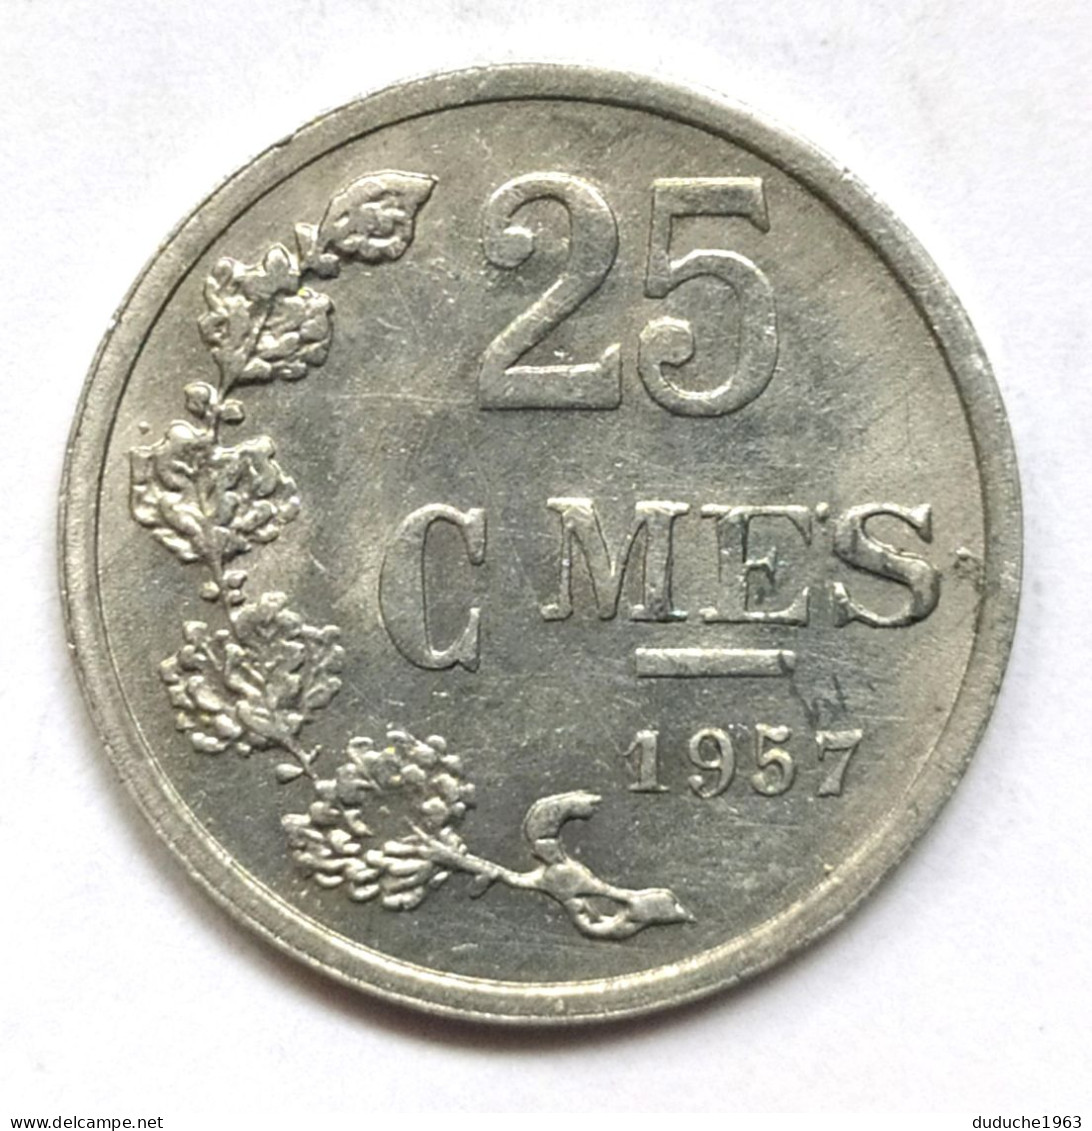 Luxembourg - 25 Centimes 1957 - Luxemburg